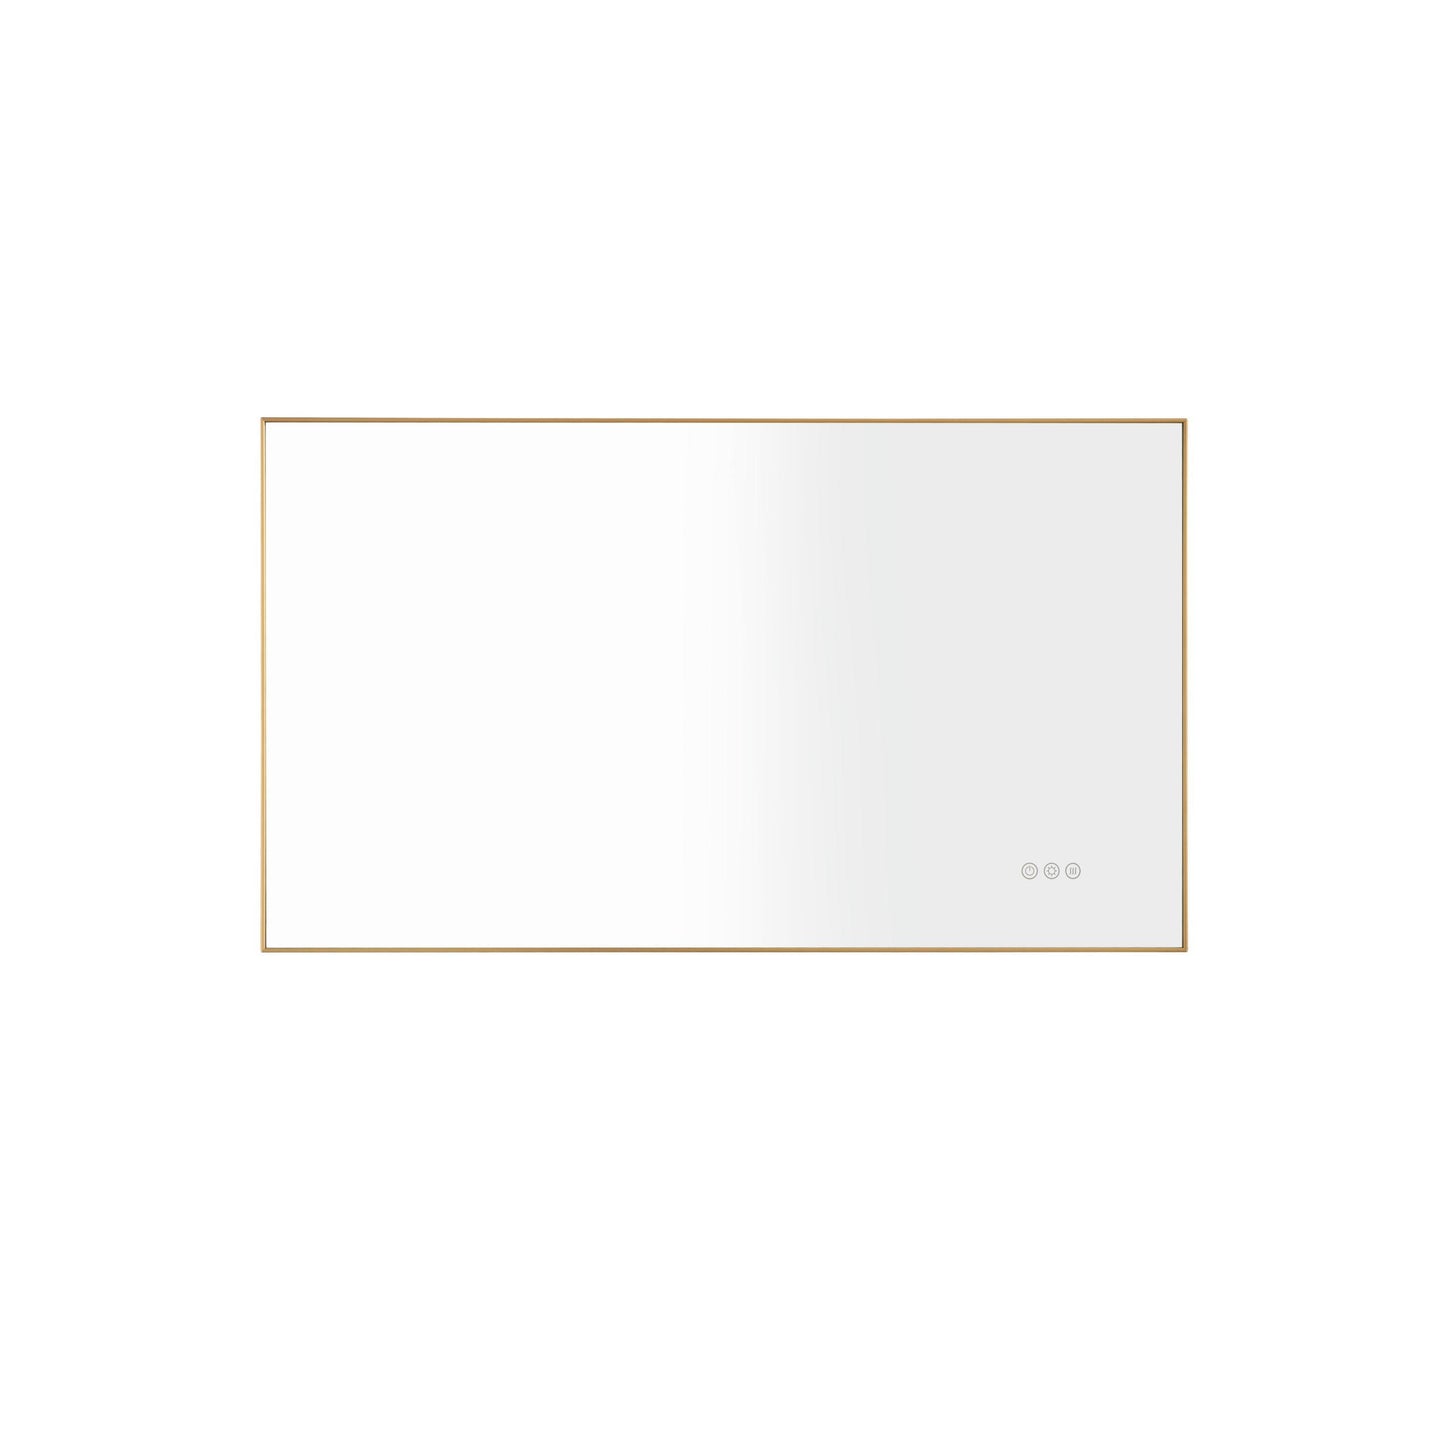 Super Bright Led Bathroom Mirror with Lights, Metal Frame Mirror Wall Mounted Lighted Vanity Mirrors for Wall, Anti Fog Dimmable Led Mirror for Makeup, Horizontal/Verti